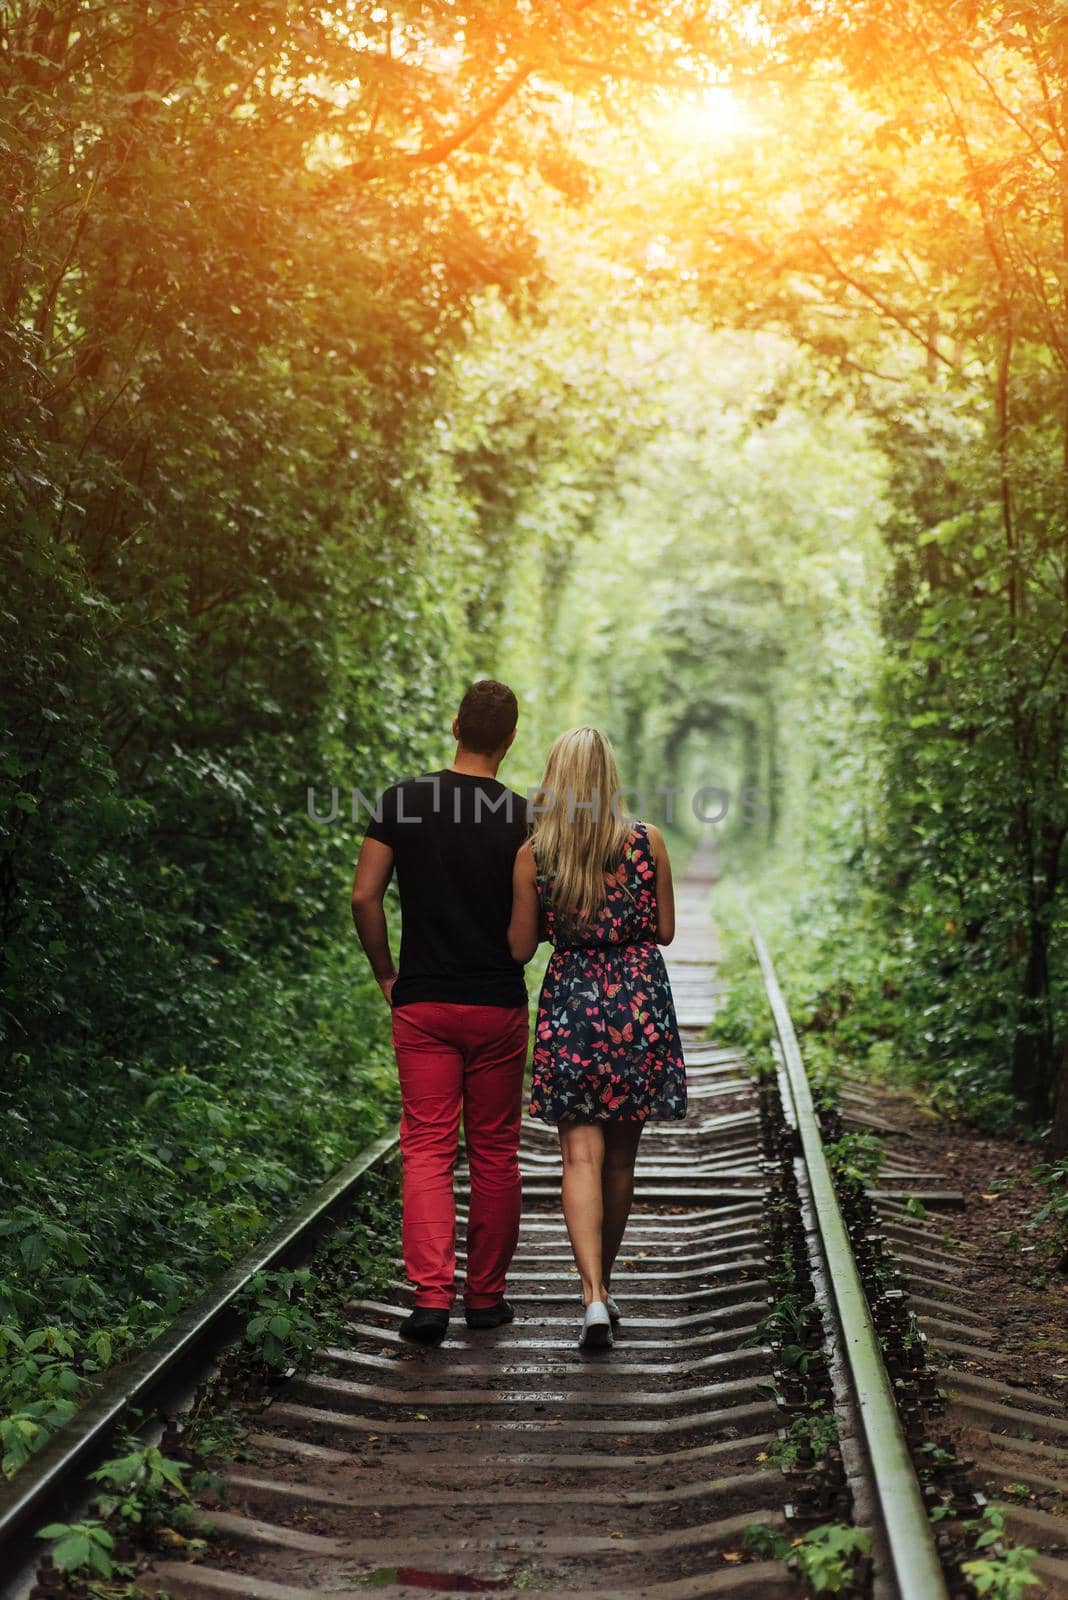 Loving couple in a tunnel of green trees on railroad by Standret